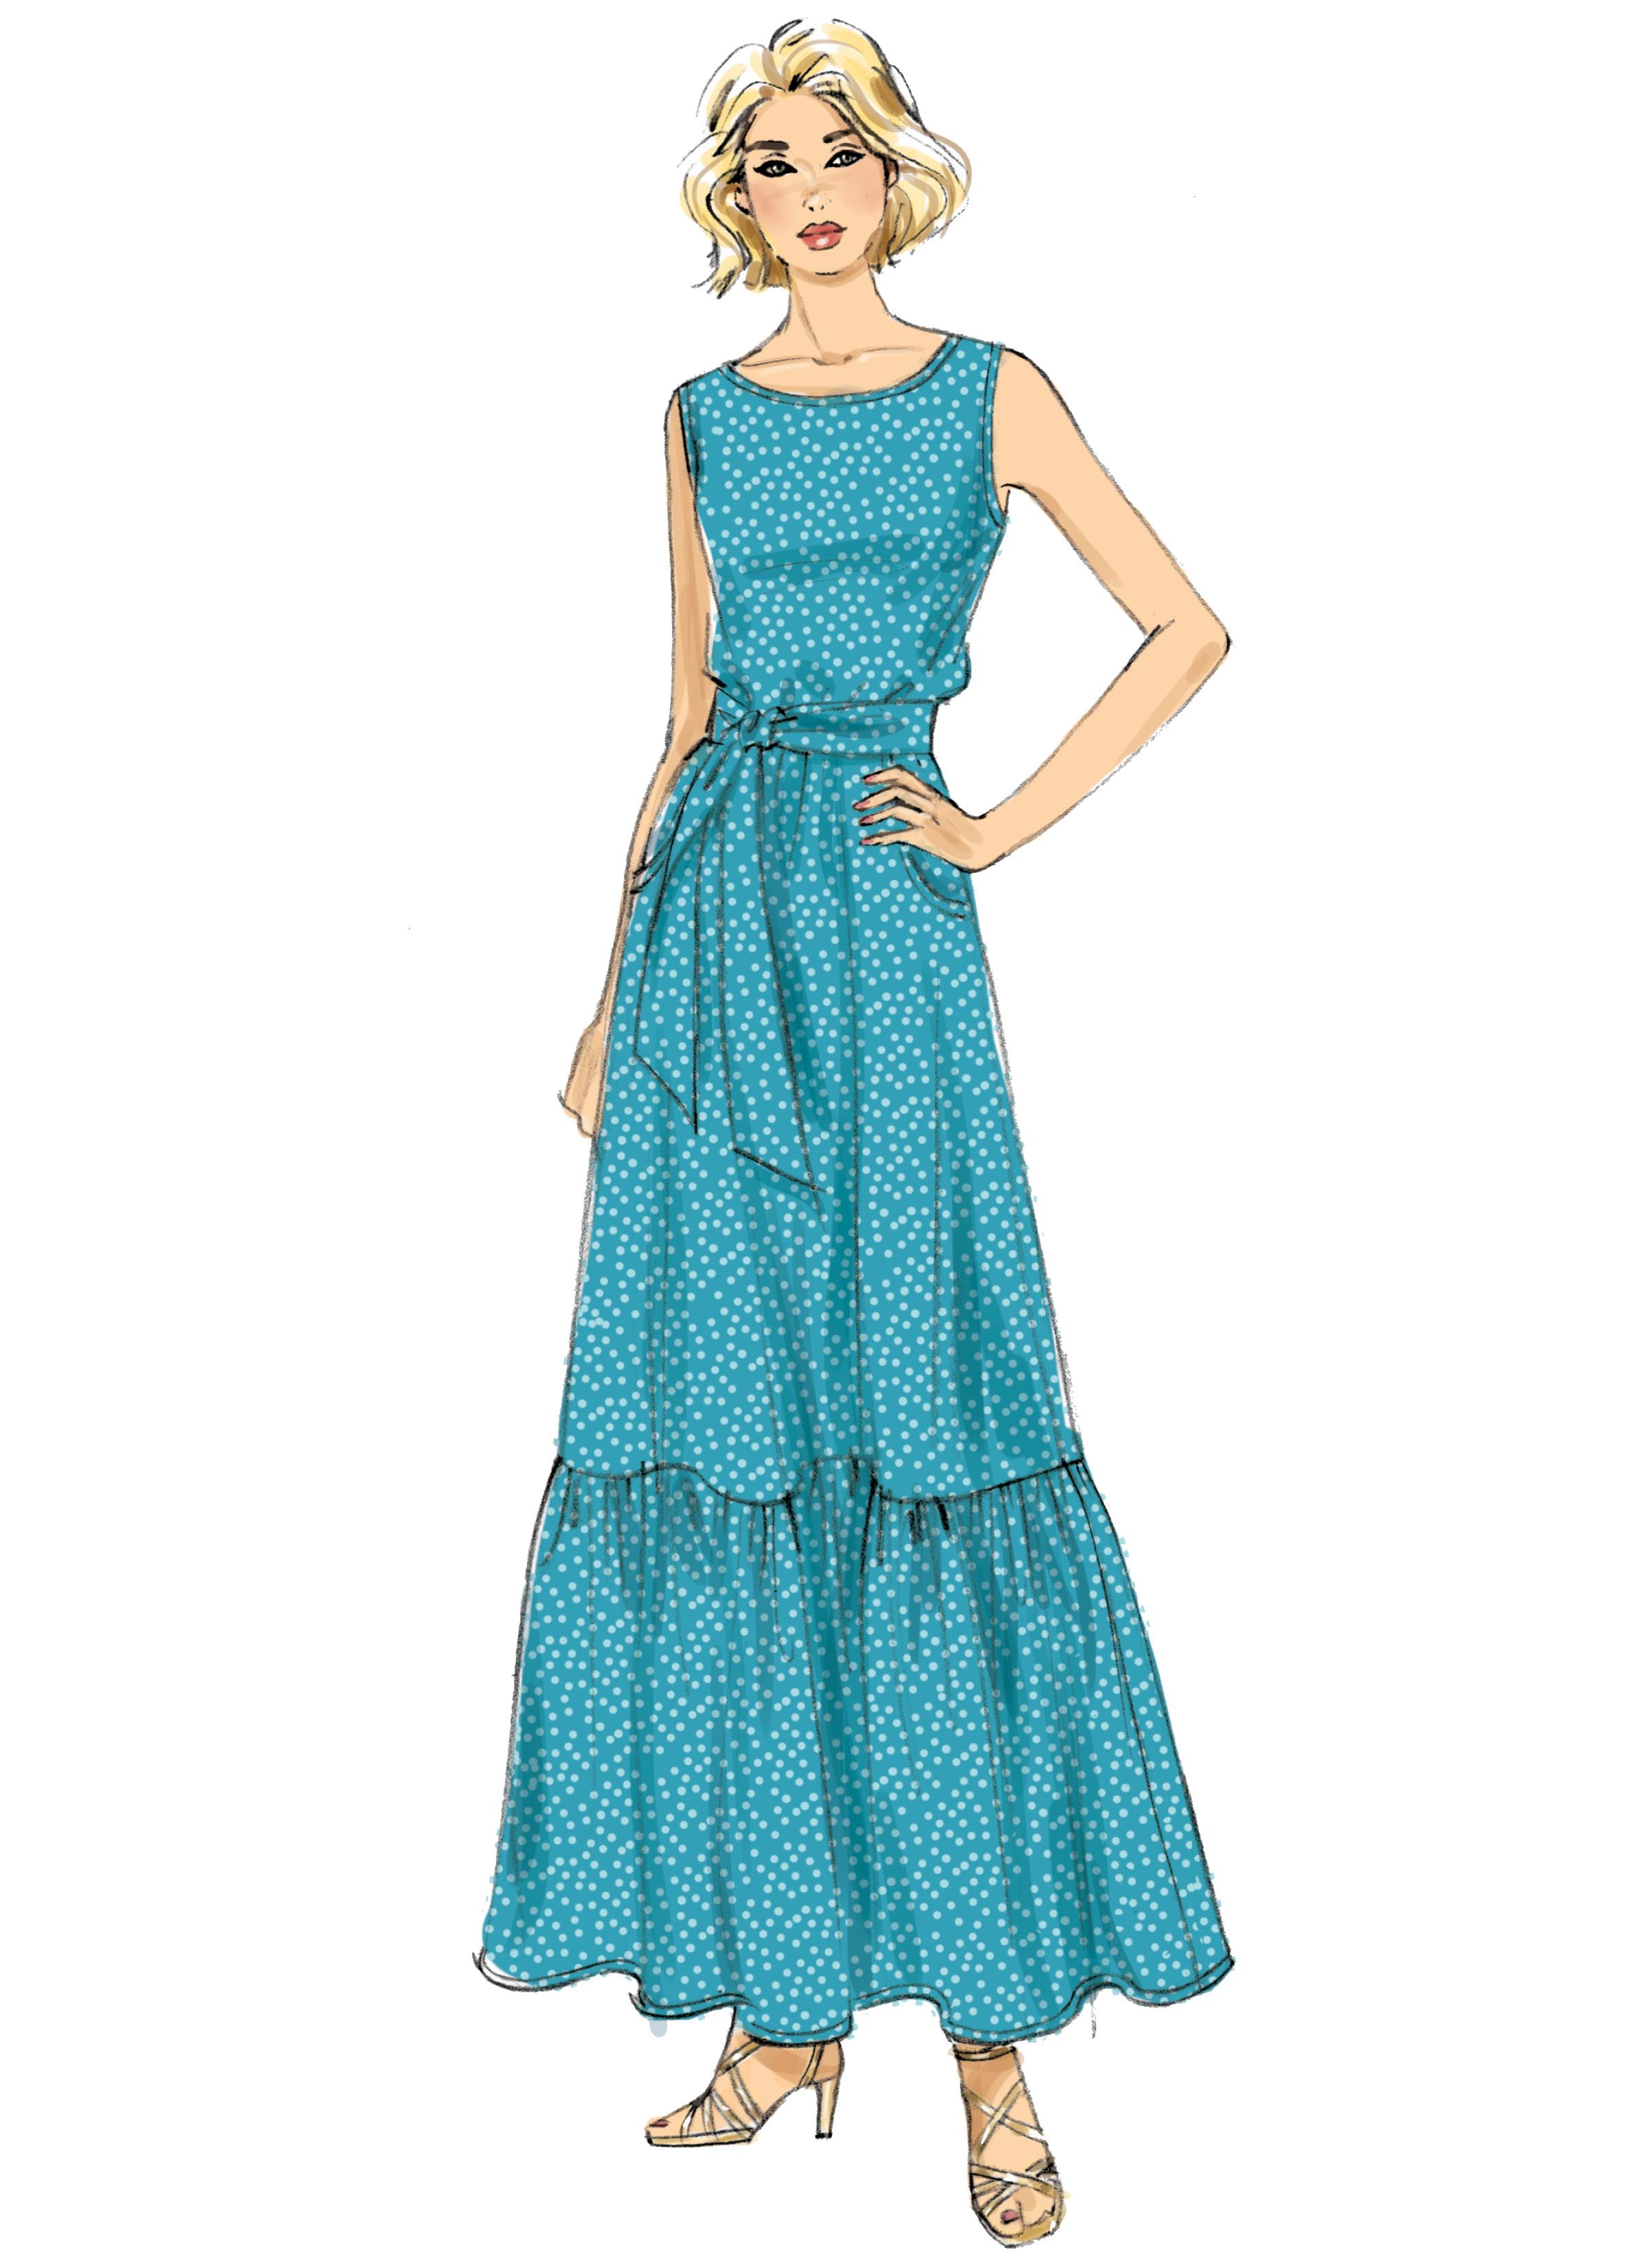 Butterick B6677 Misses' Dress and Sash